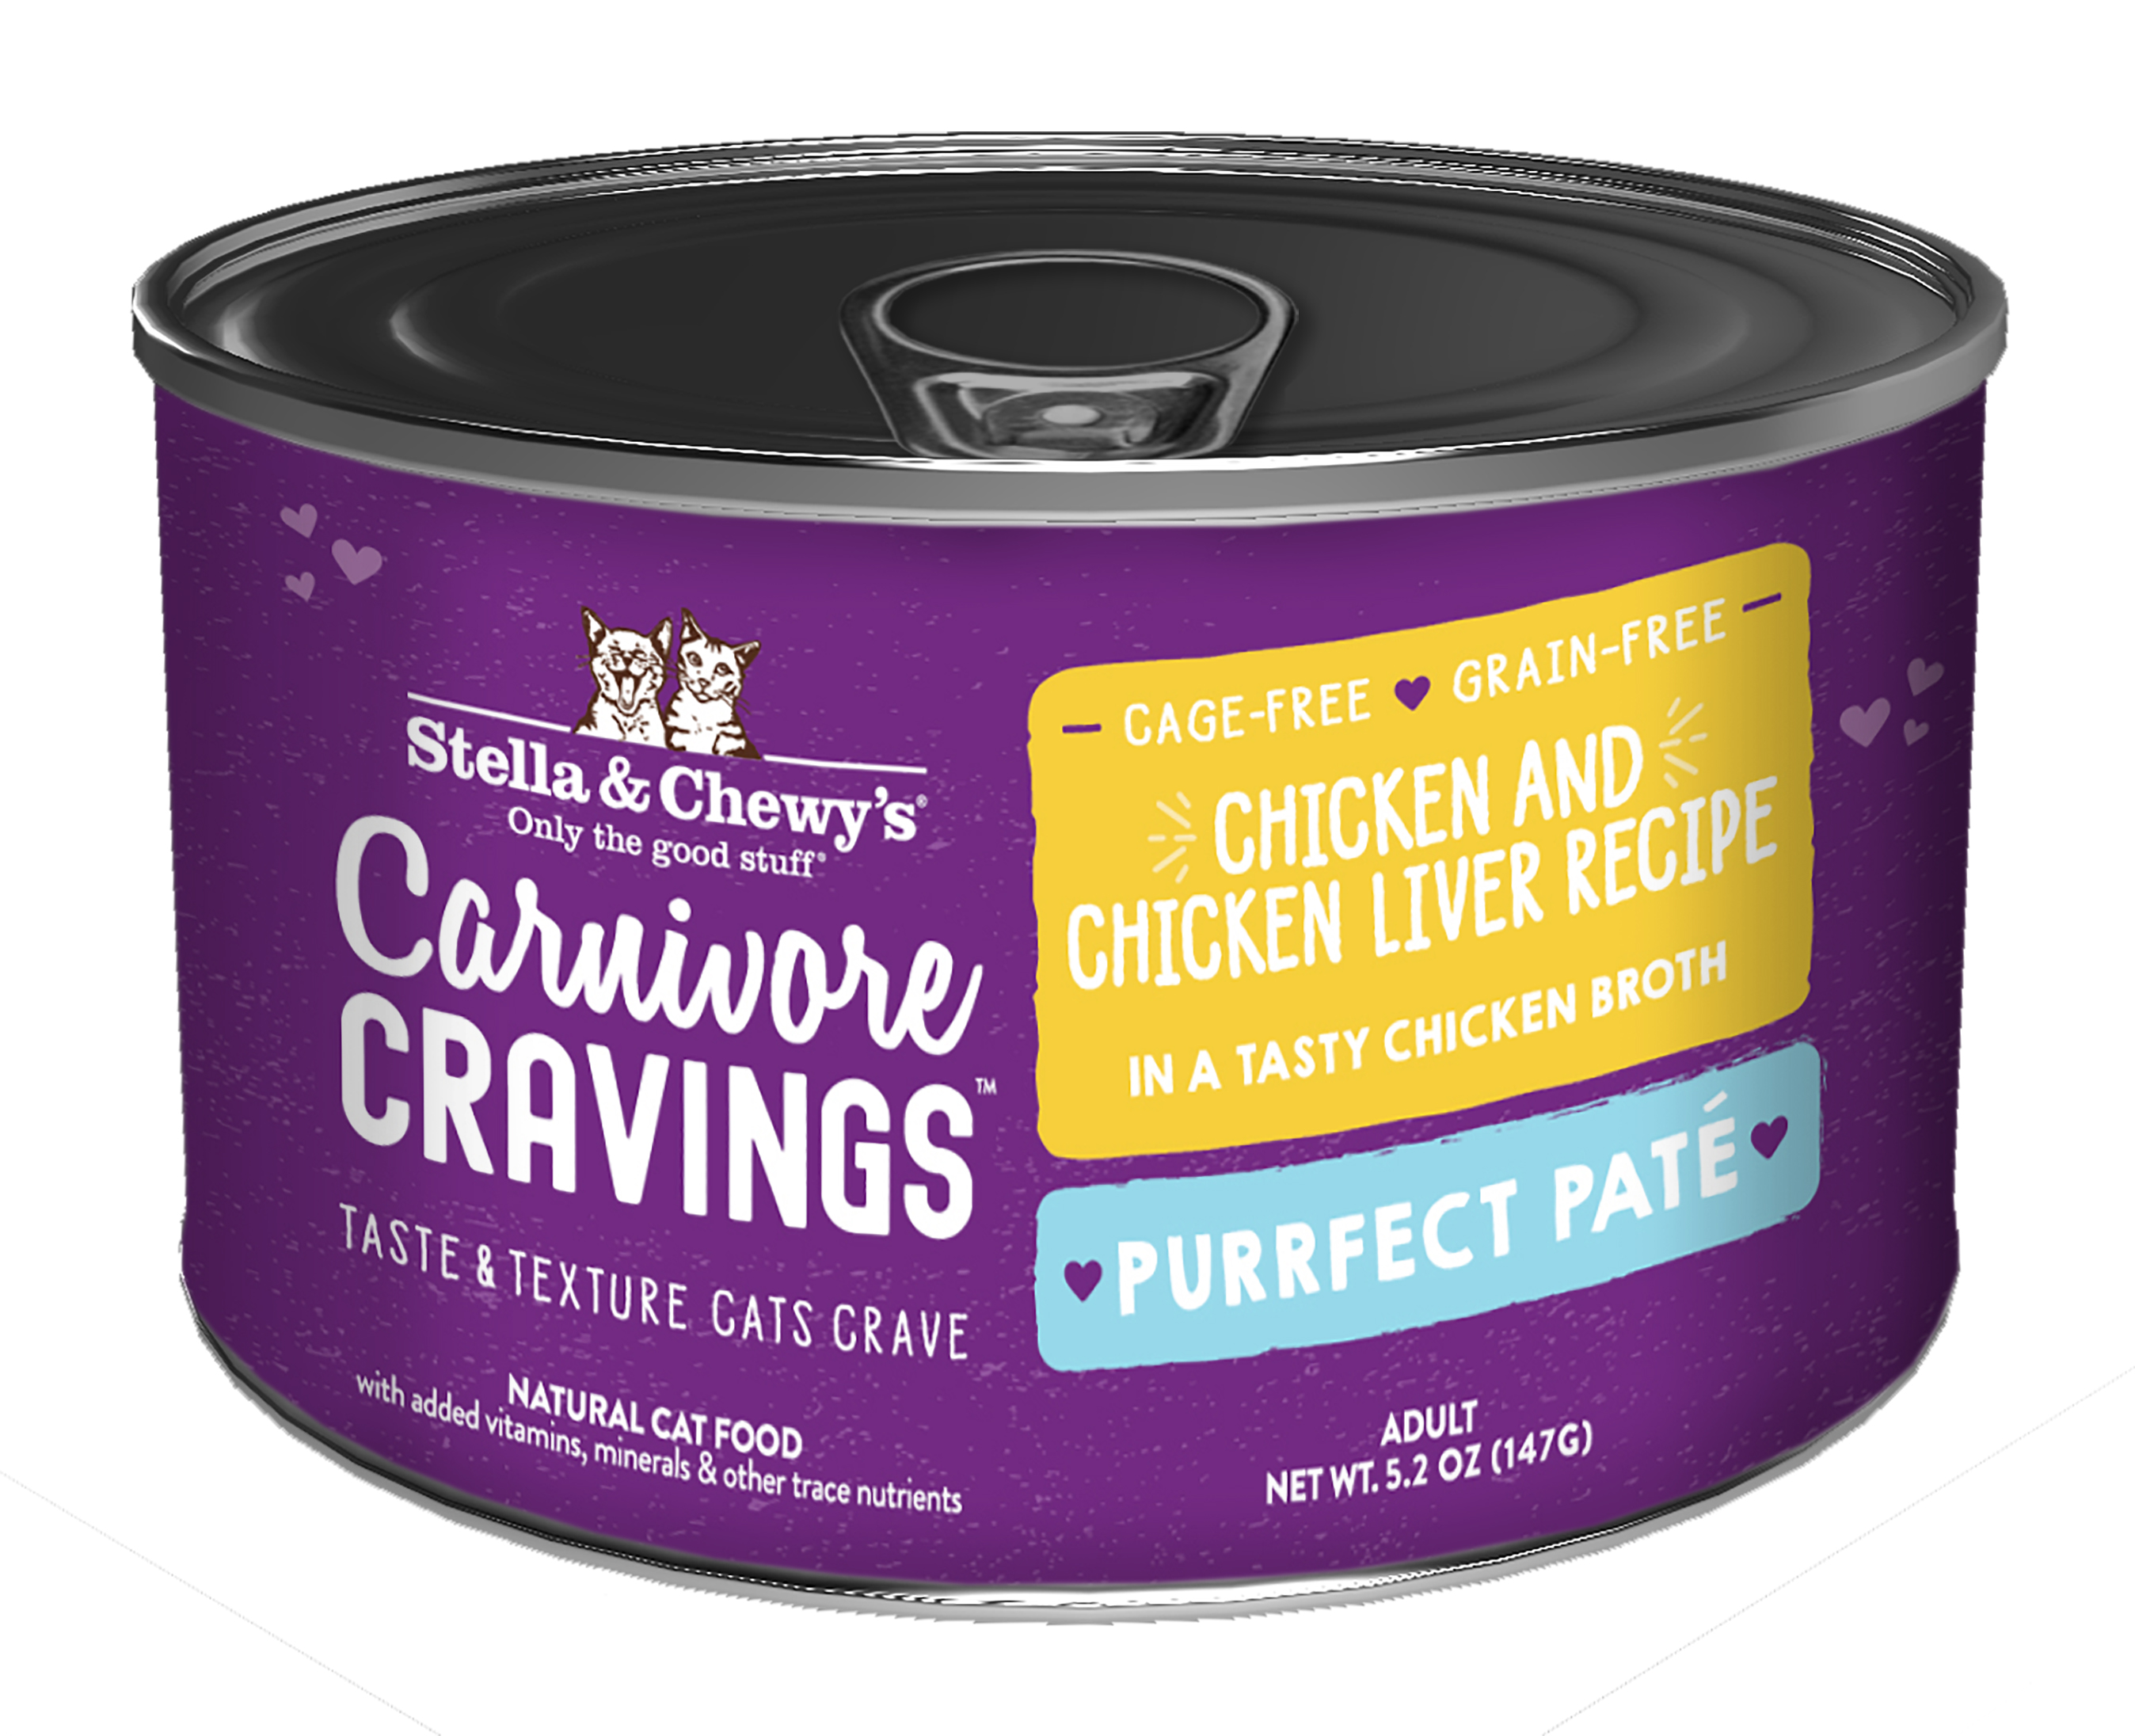 Stella & Chewy's Carnivore Cravings Purrfect Pate Canned Wet Food For Cats 147g